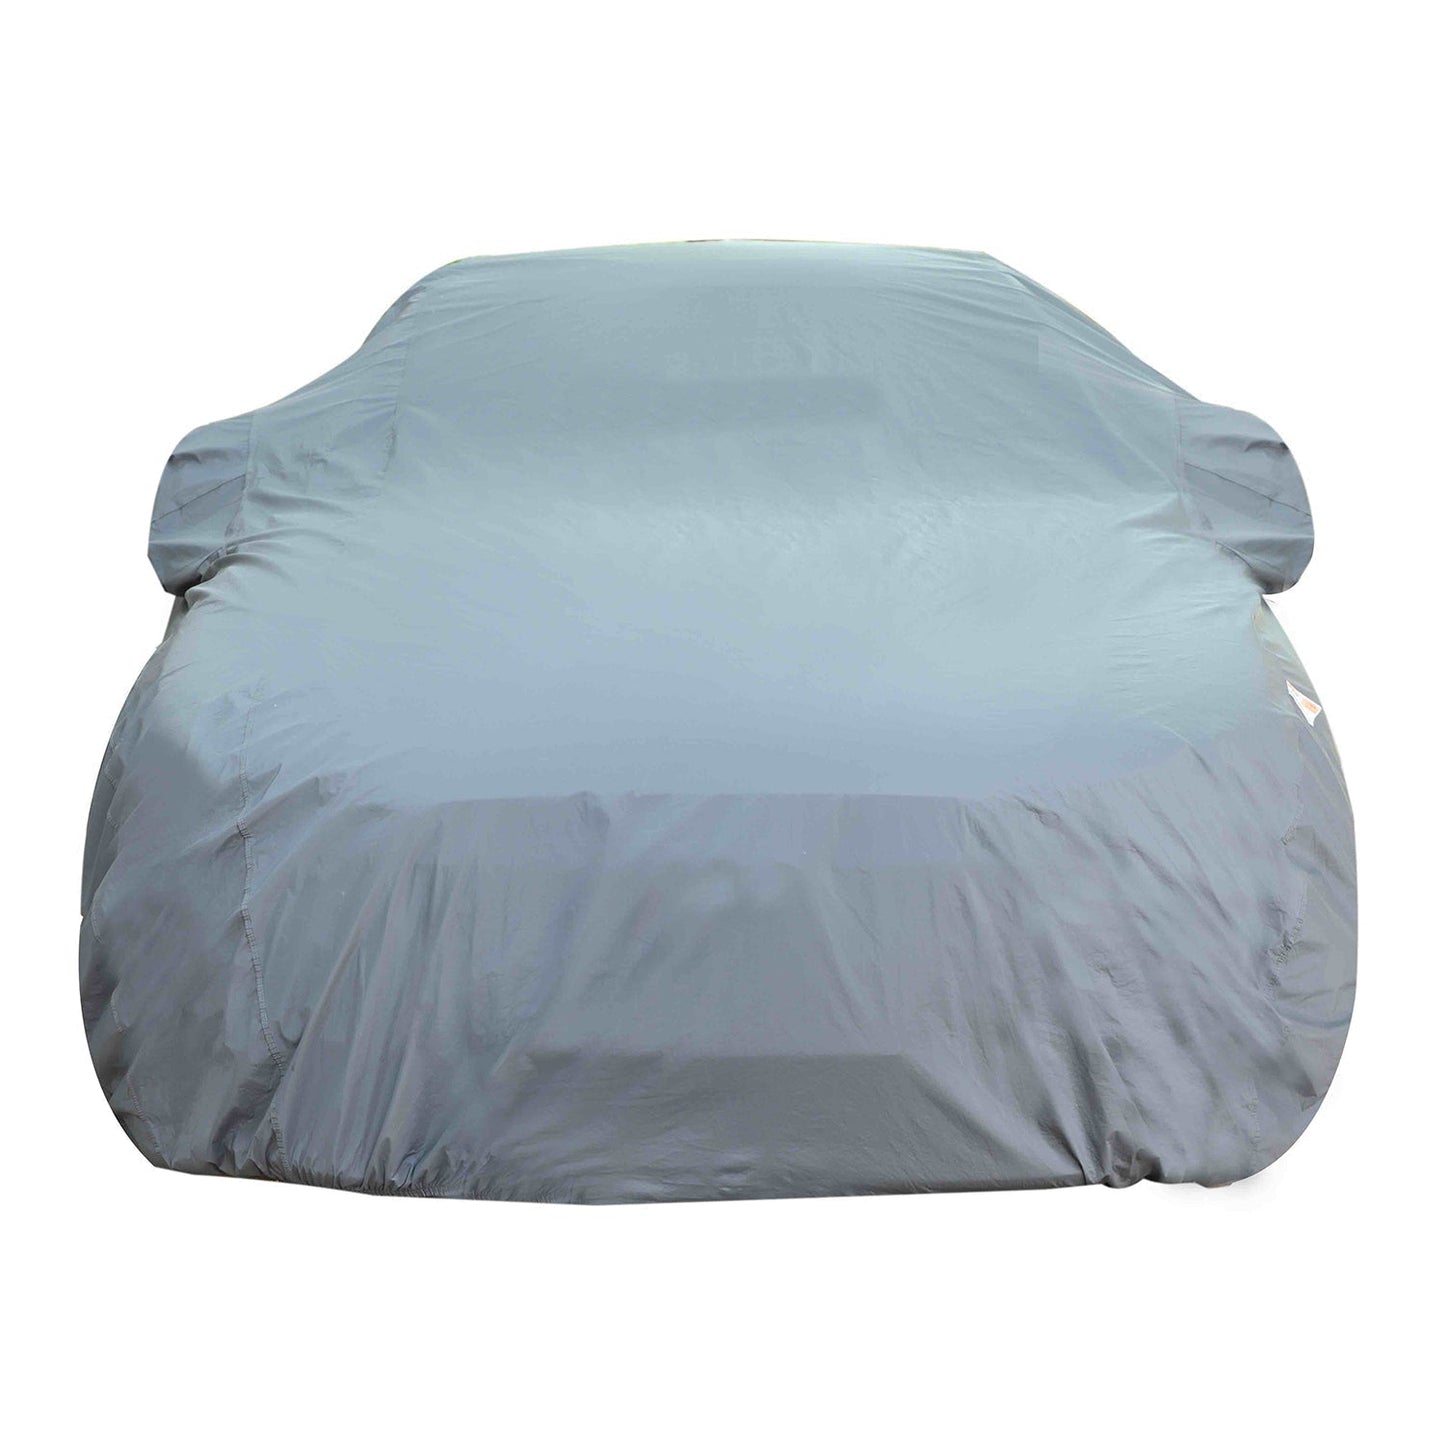 Oshotto Dark Grey 100% Anti Reflective, dustproof and Water Proof Car Body Cover with Mirror Pockets For Toyota Liva